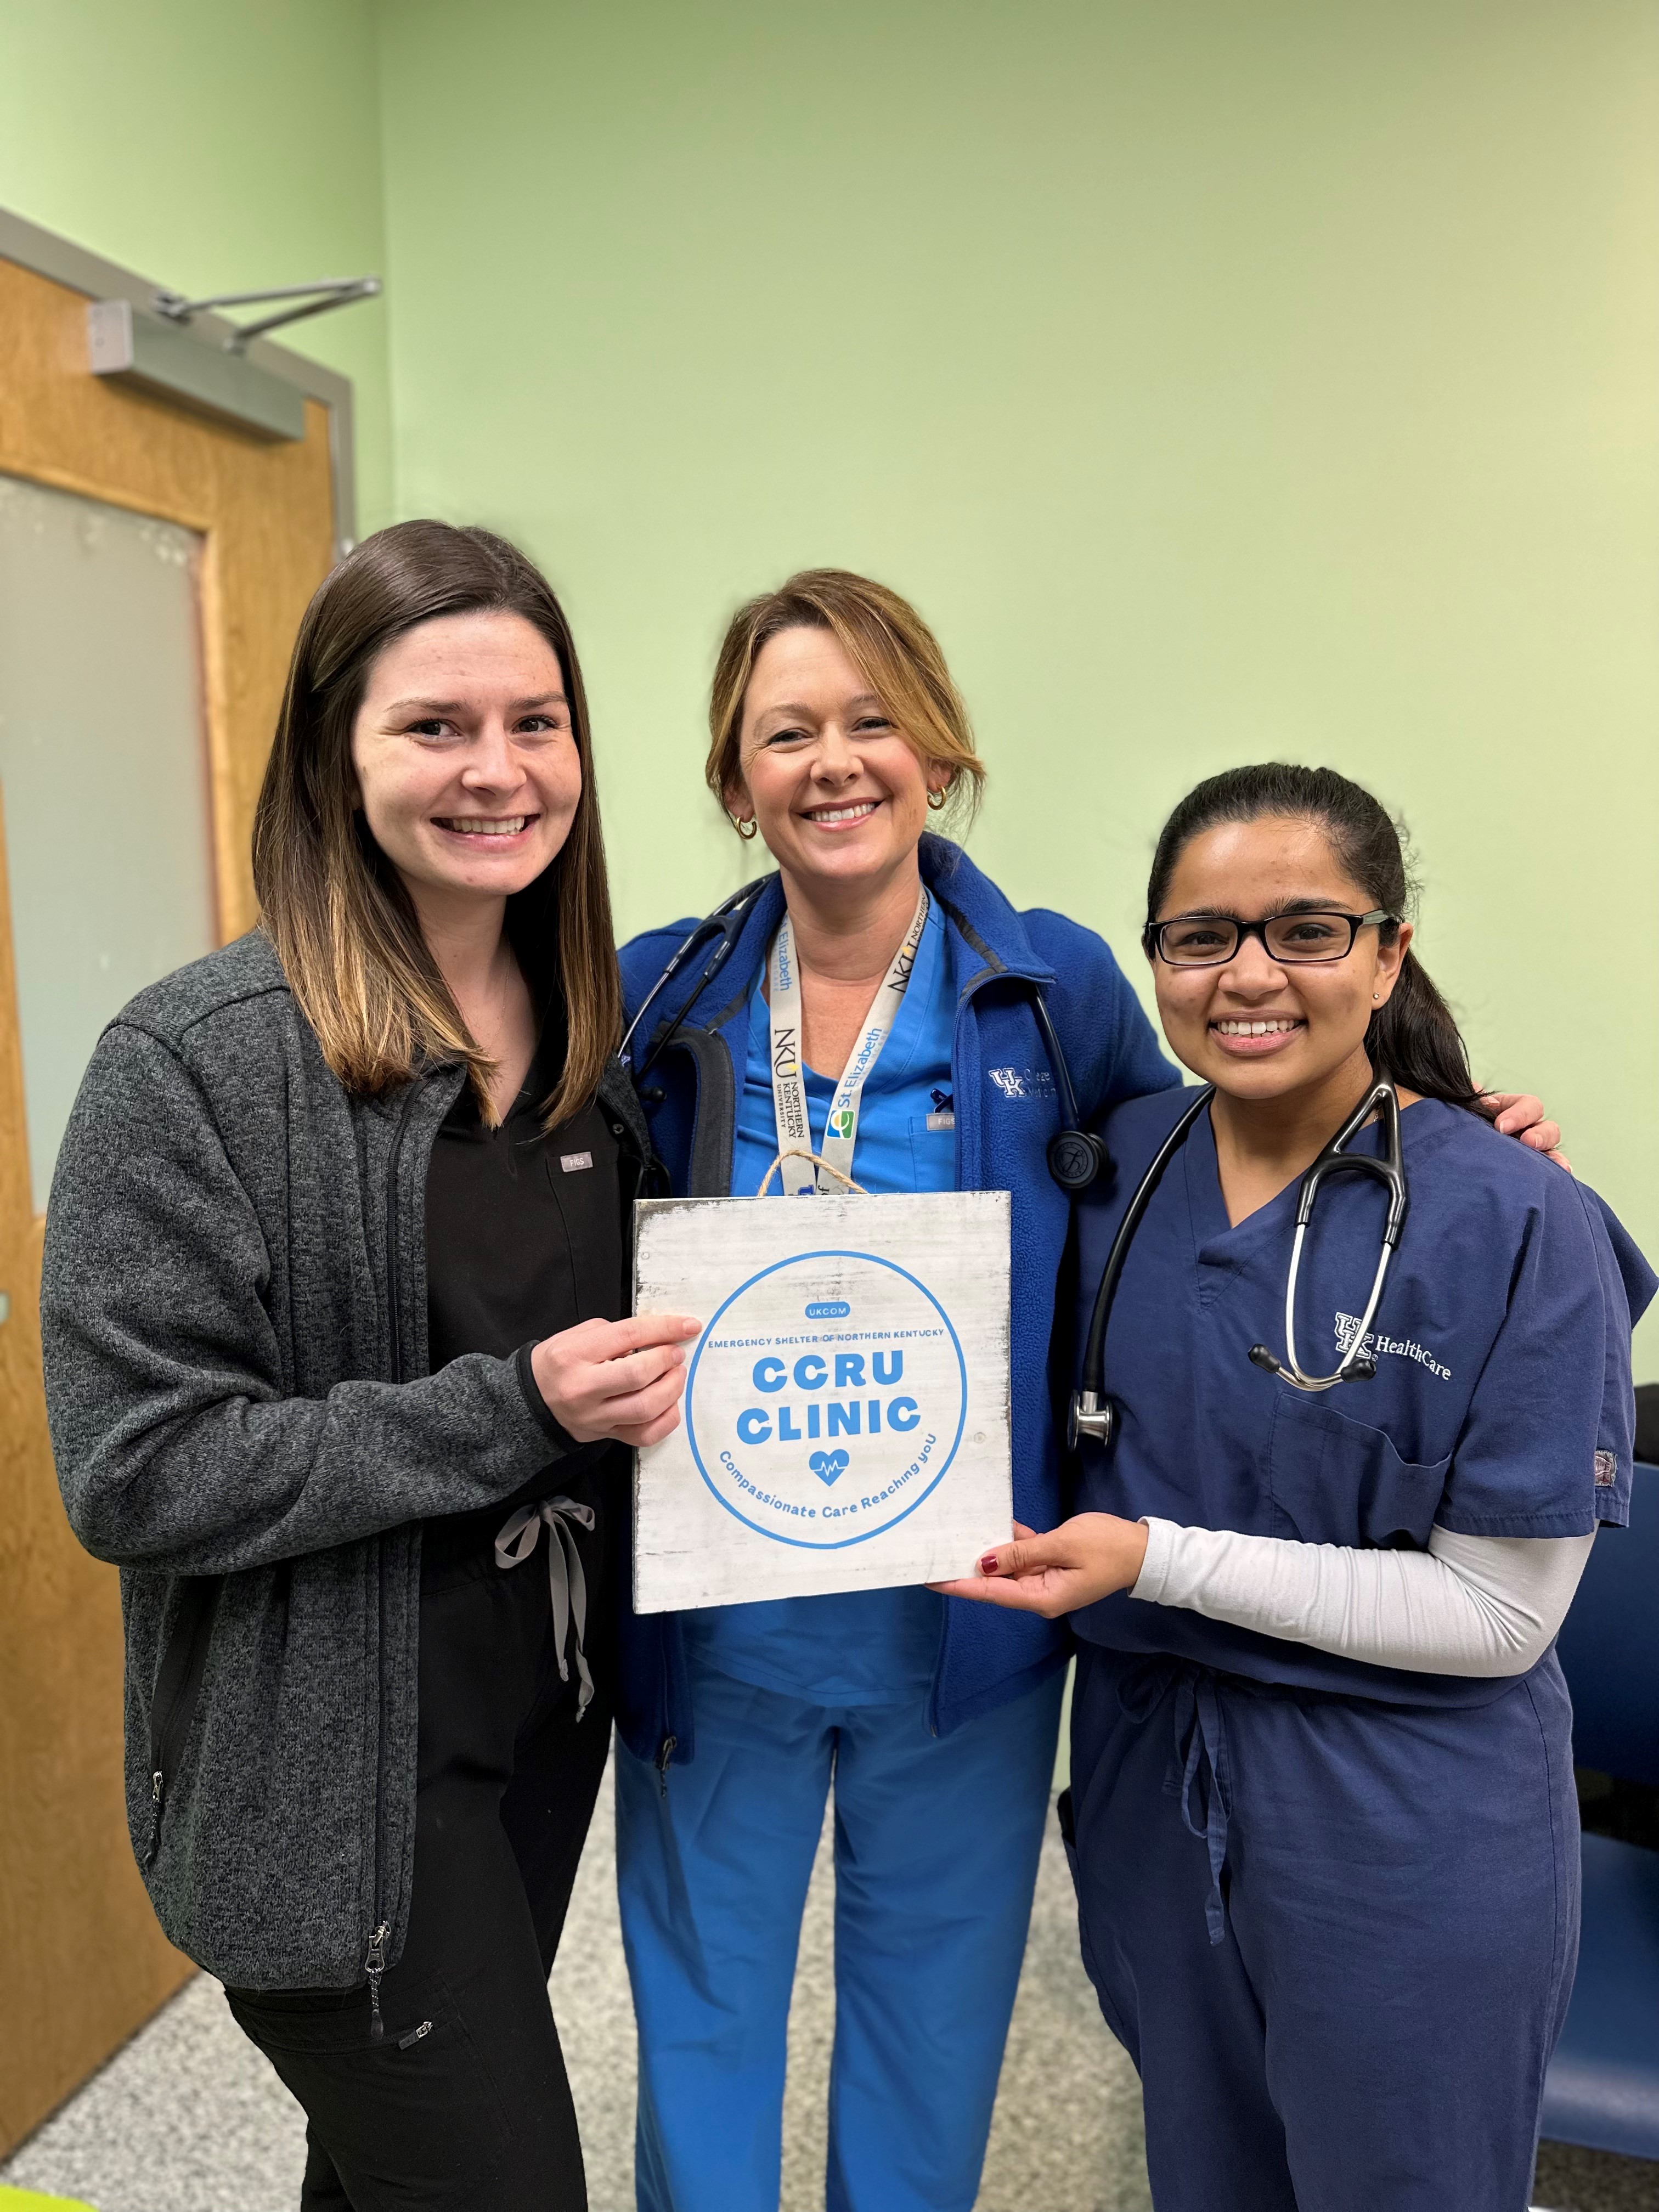 CCRU clinic student volunteers Christa Mattingly and Sonia Bhati pose with Dr. Holly Danneman